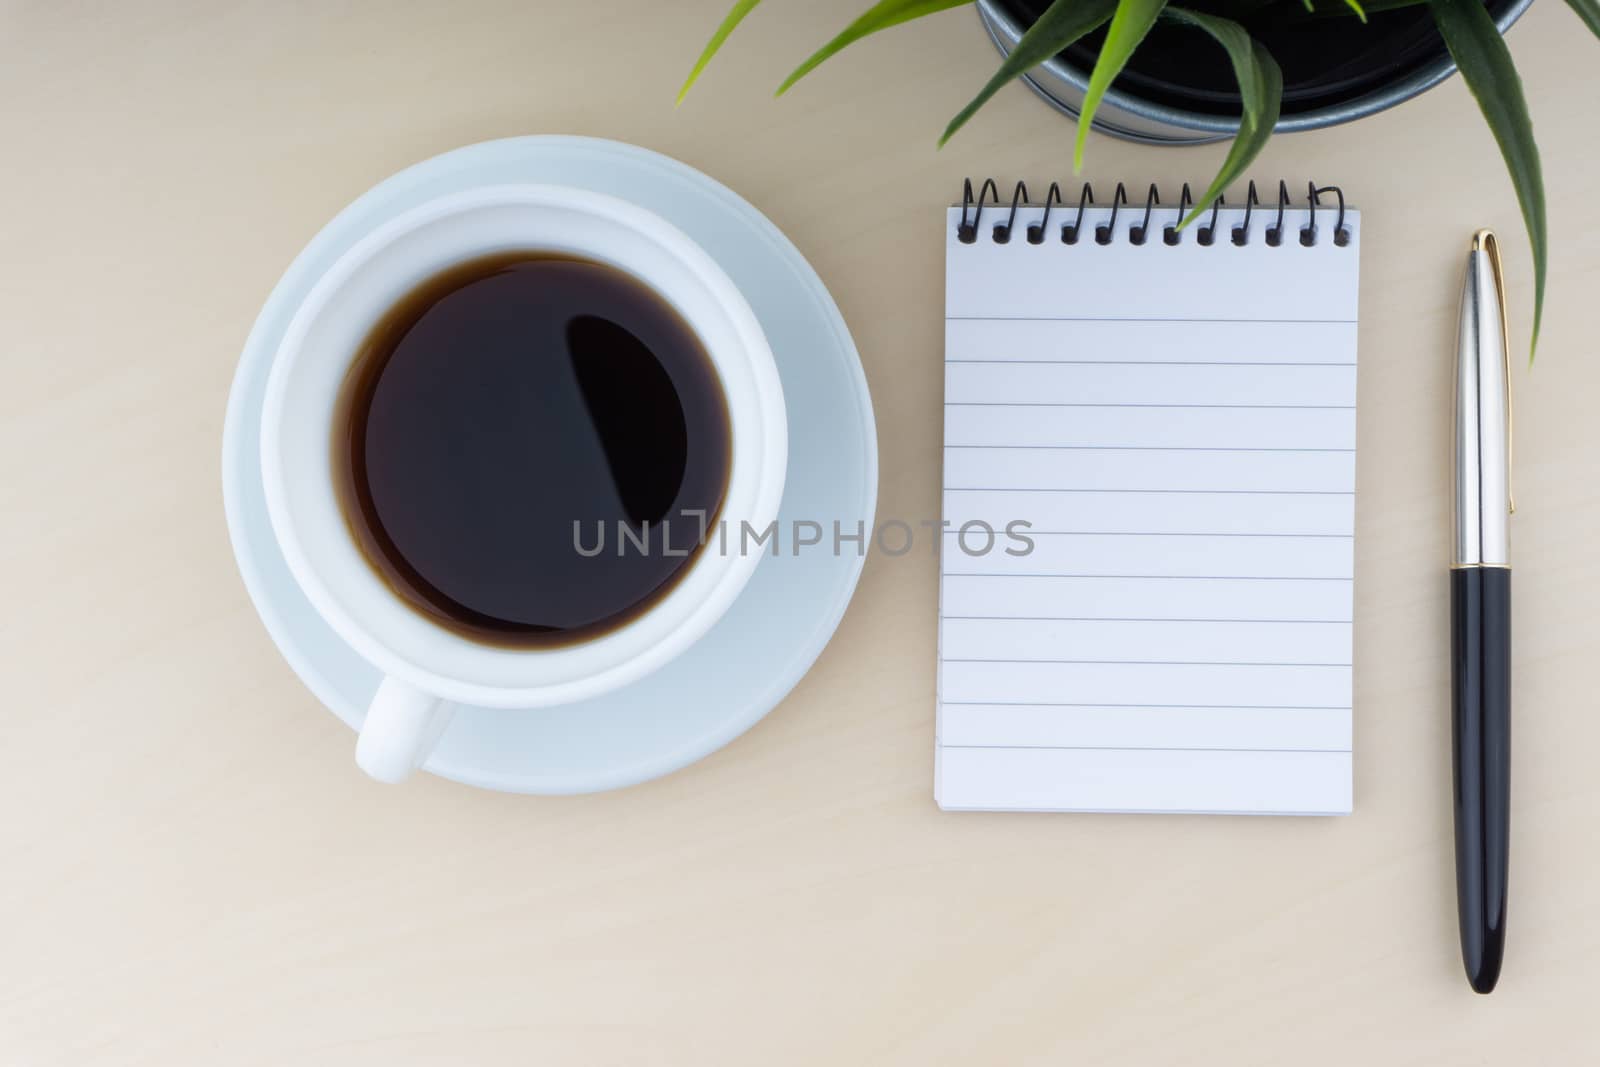 Fountain pen, decorative plant, notepad and cup of coffee on wooden background. Business and copy space concept.
 by silverwings